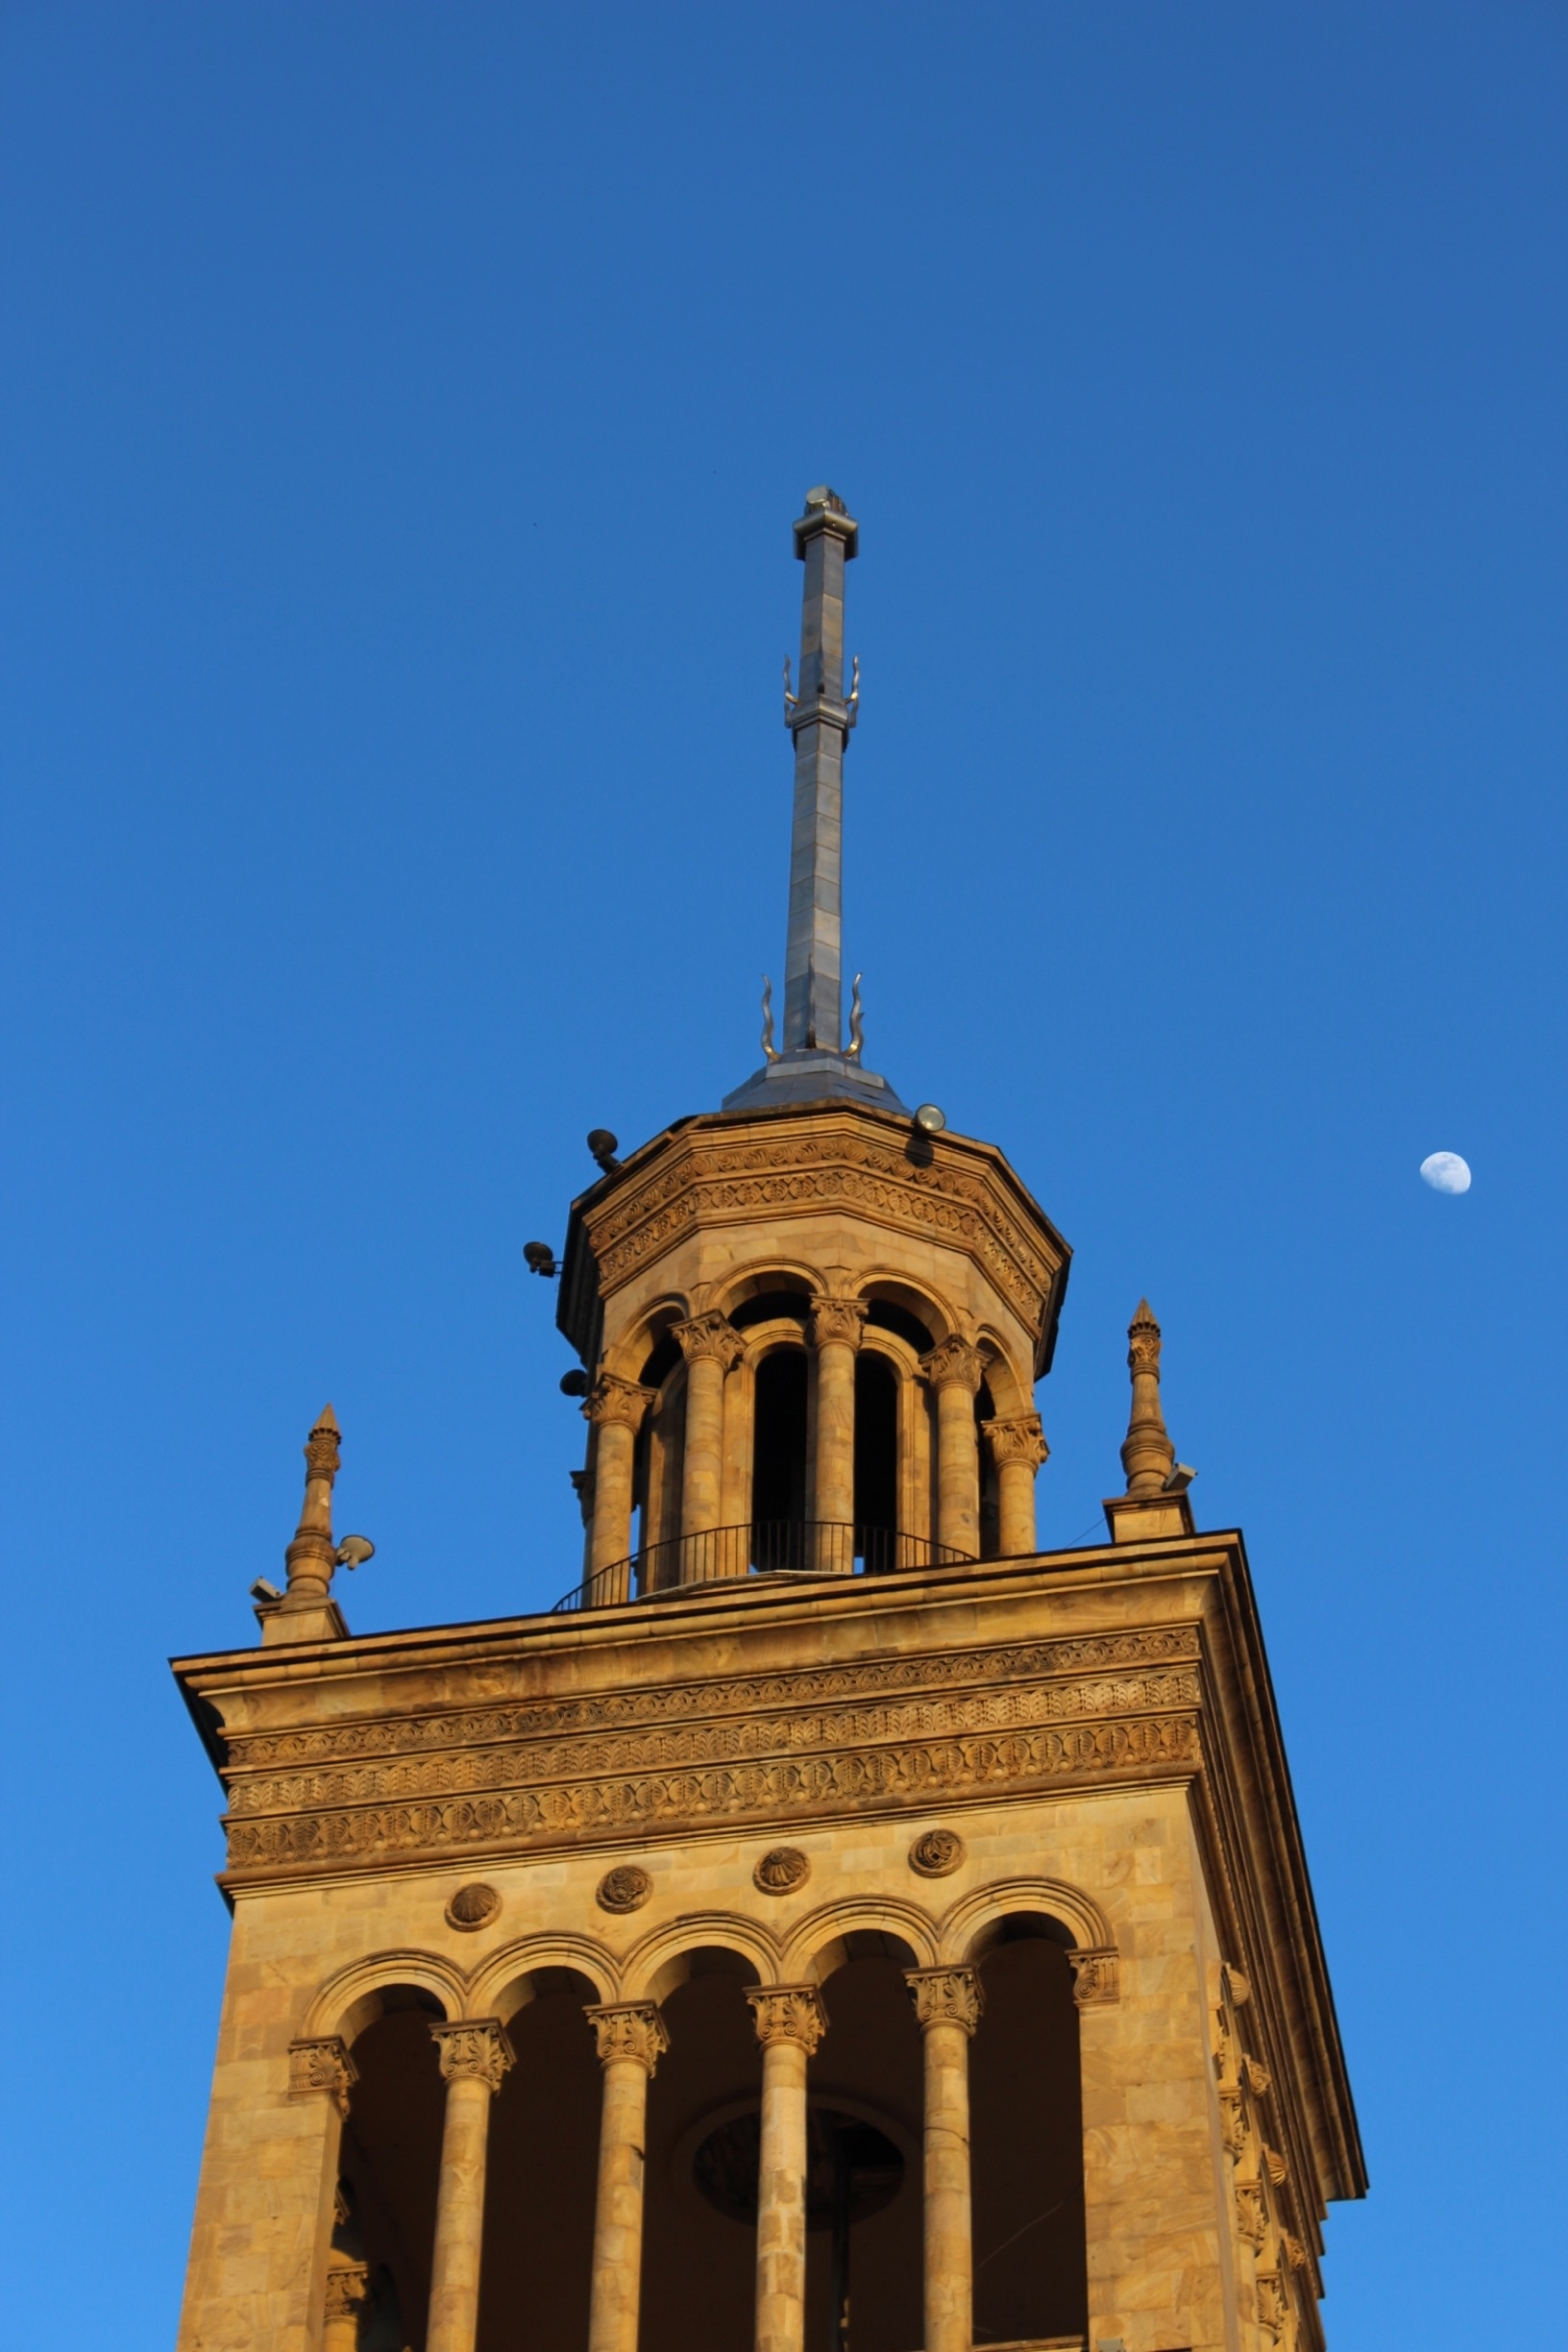 View of the moon rising next to the spire atop the Georgian National Academy of Sciences building in Tbilisi, Georgia. 